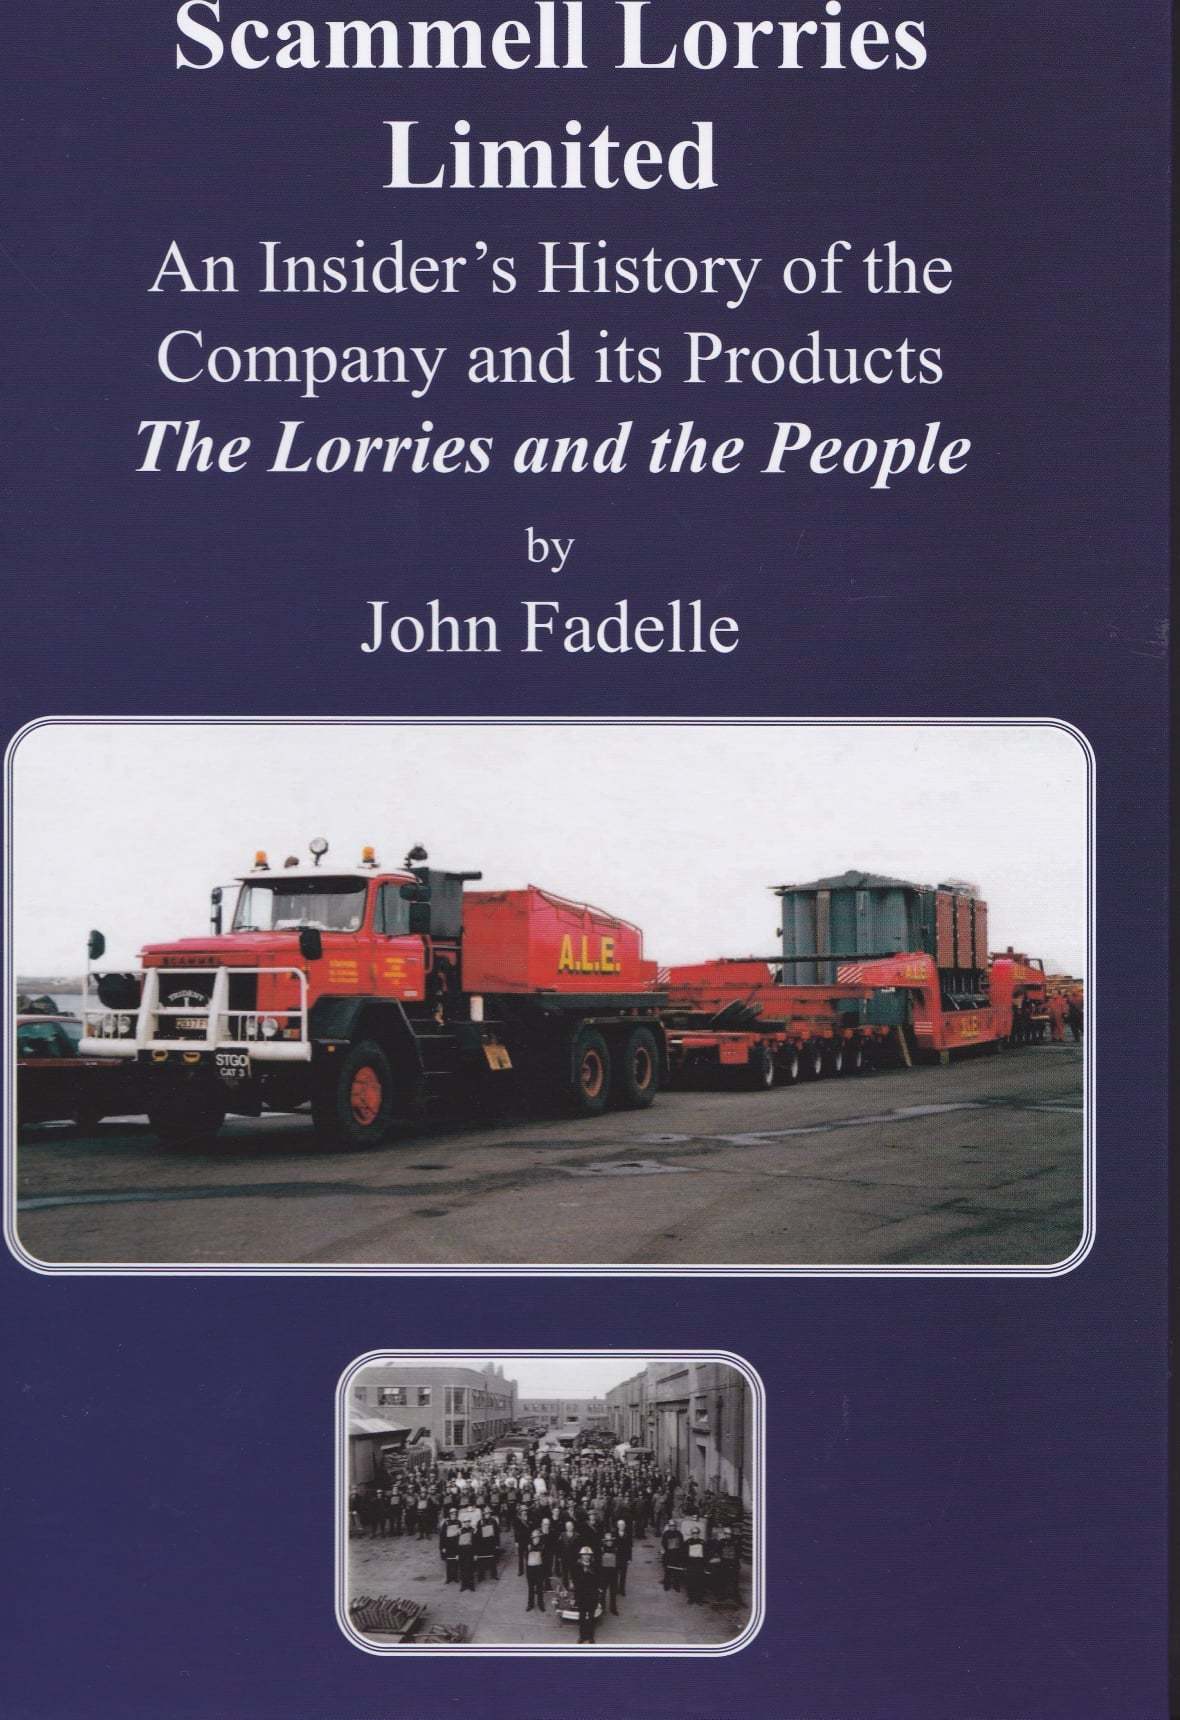 The front cover of John Fadelles book